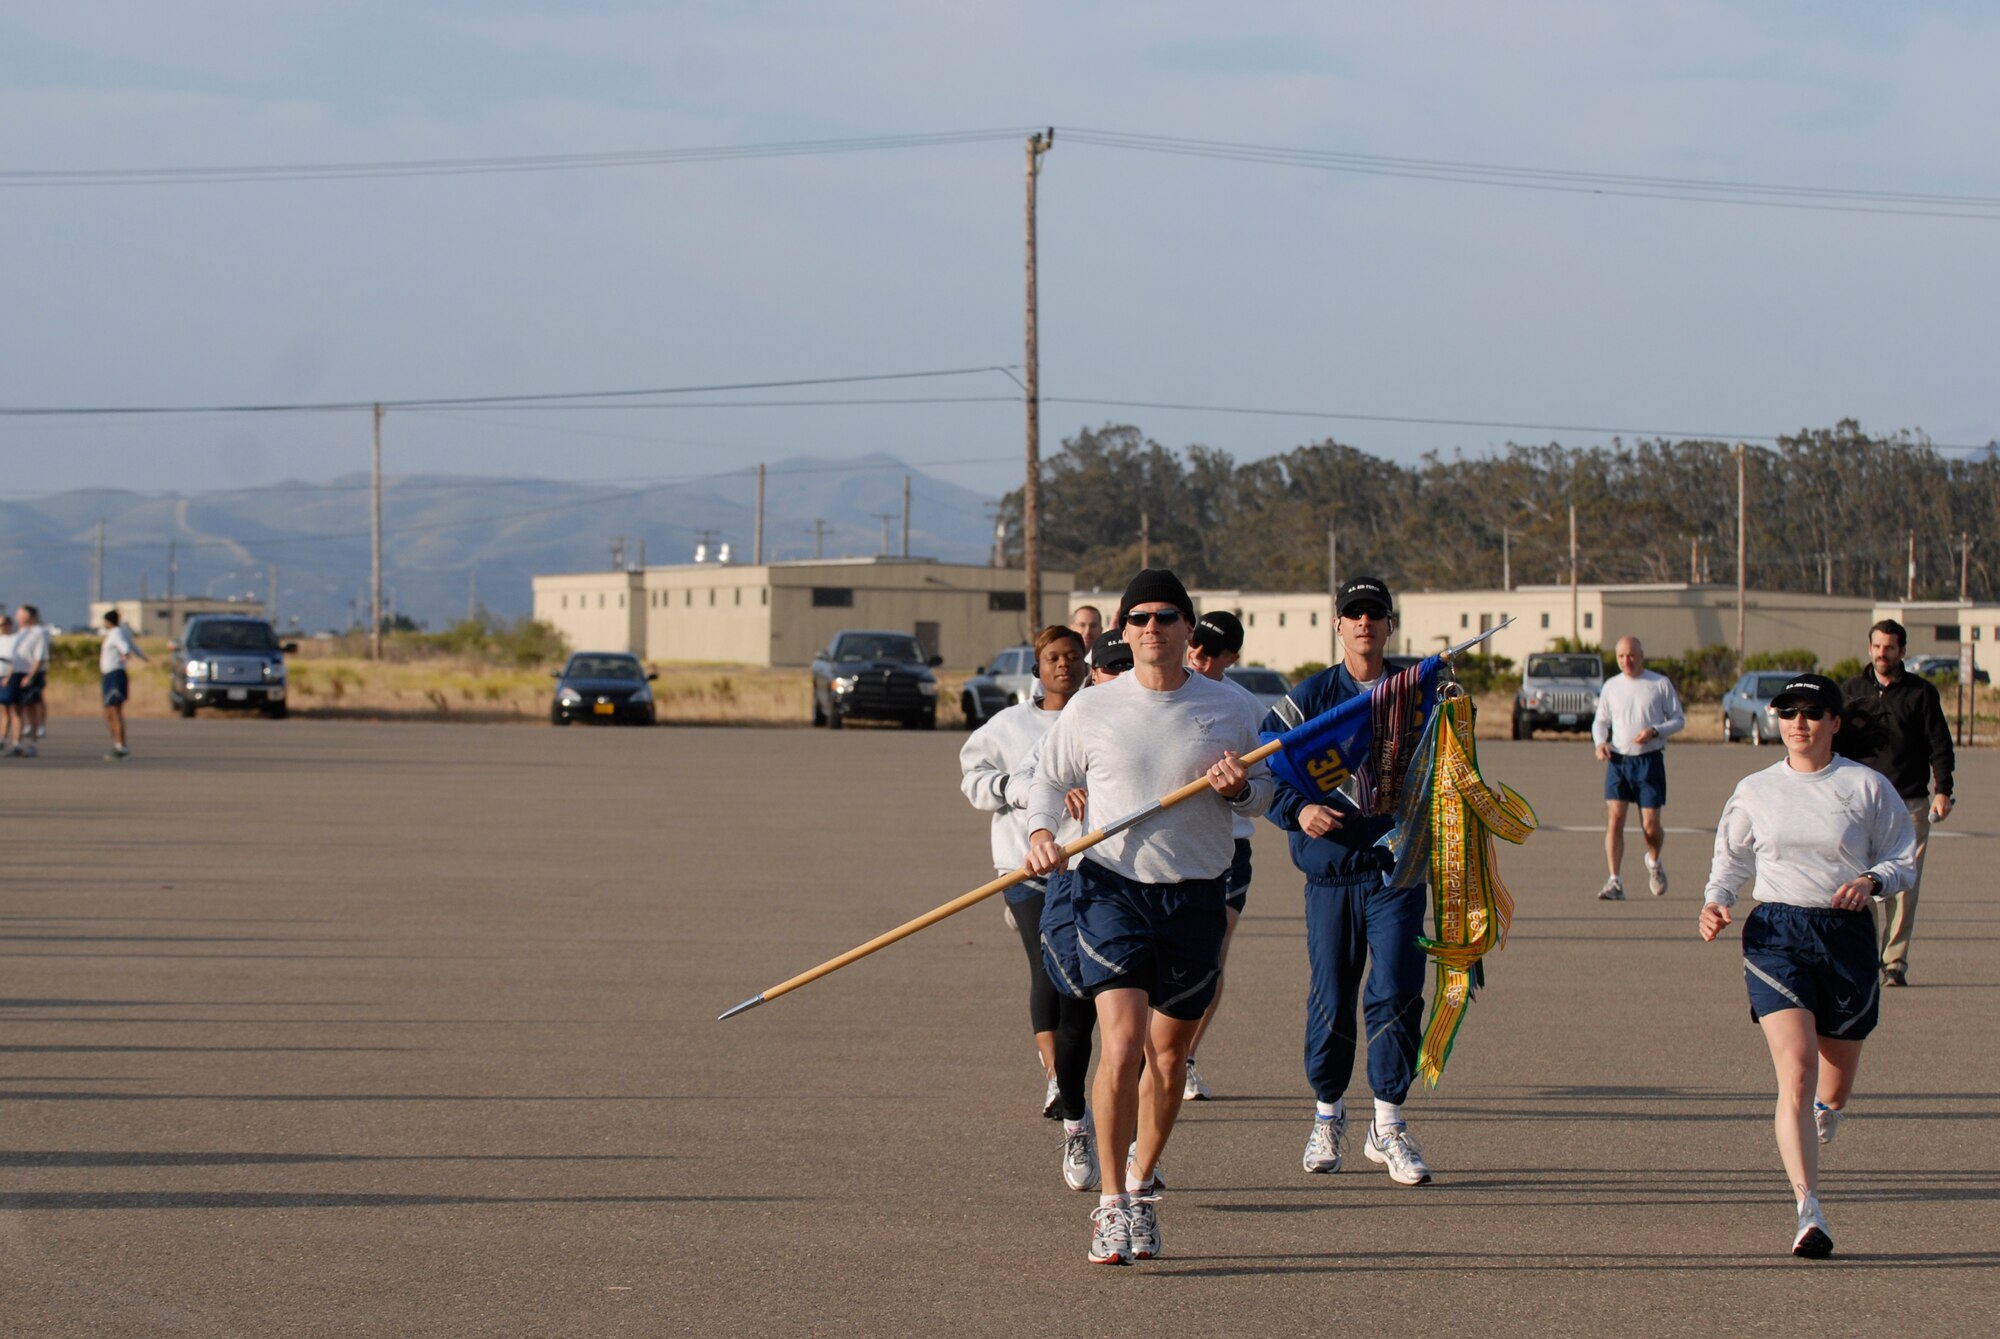 VANDENBERG AIR FORCE BASE, Calif. -- The 30th Weather Squadron led the Wing Run at the parade grounds here Tuesday, May 31, 2011.  The 30th WS led their last  Wing Run before the squadron inactivates on Friday, June 3.  (U.S. Air Force photo/Staff Sgt. Andrew Satran) 

  